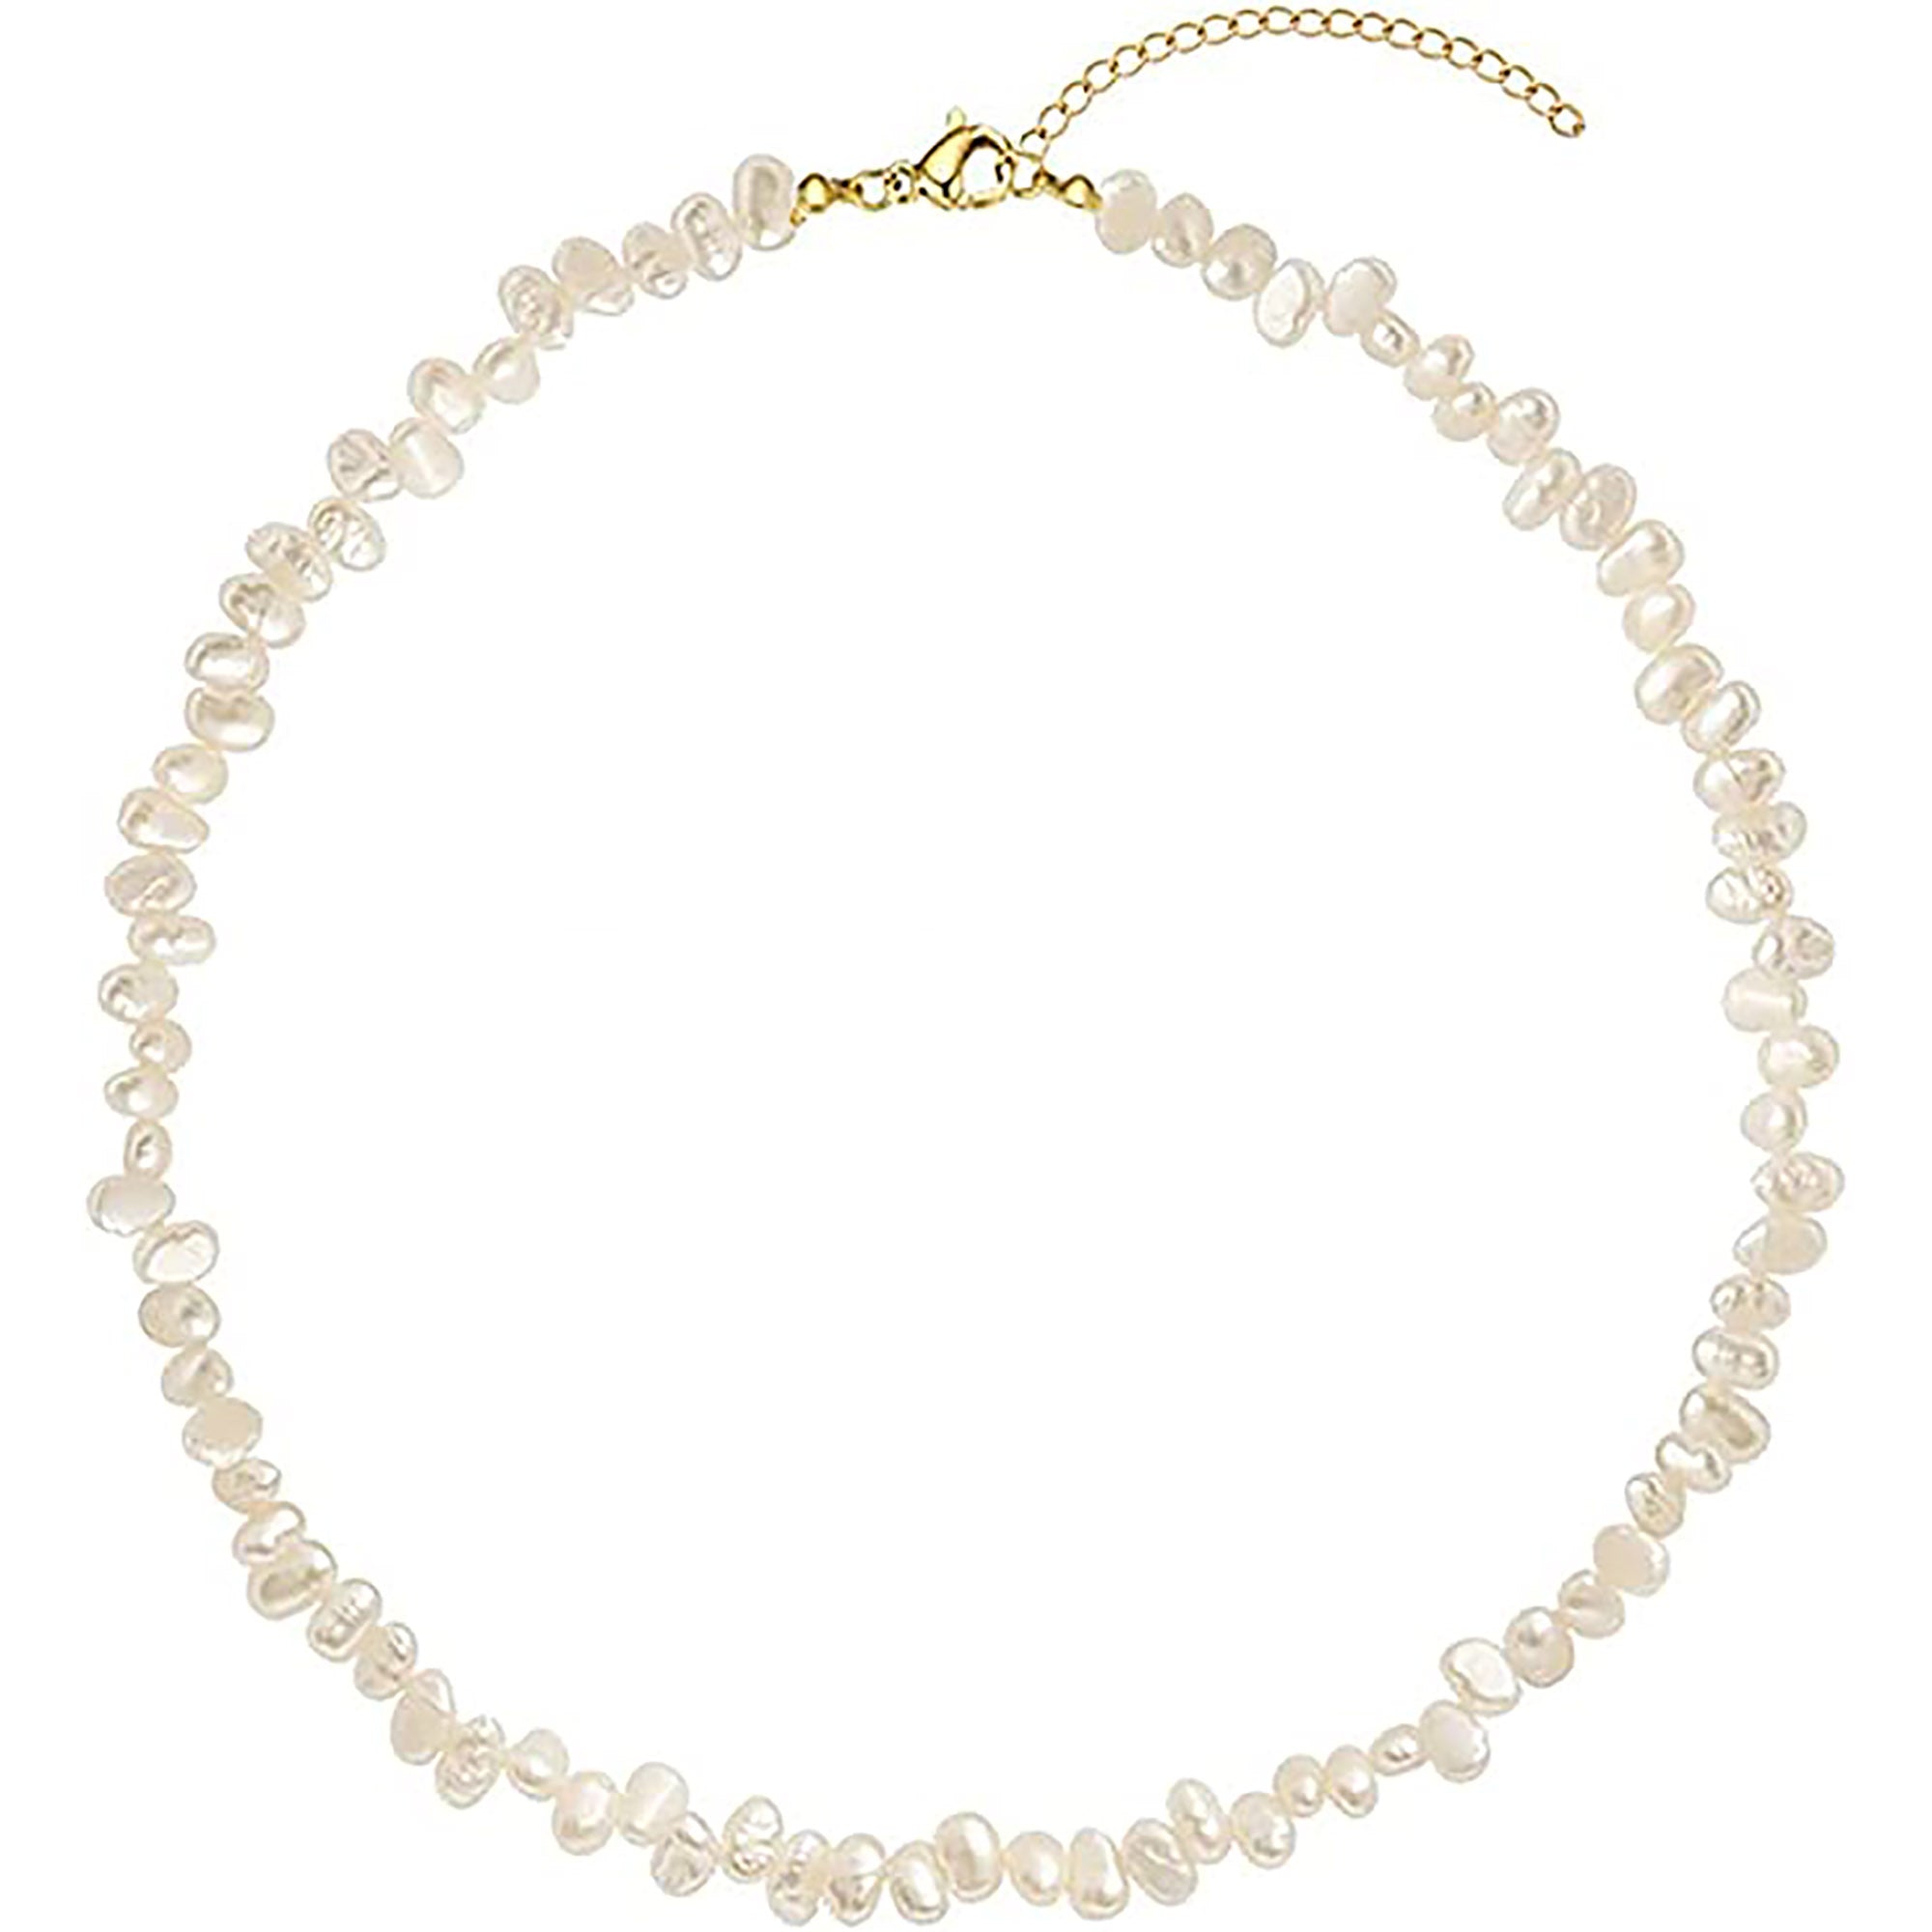 3 mm / 15.7 inches Pearl Choker Fashion Handpicked Cultured Barque Pearls Handmade Strand Chain Trendy Delicate Necklace